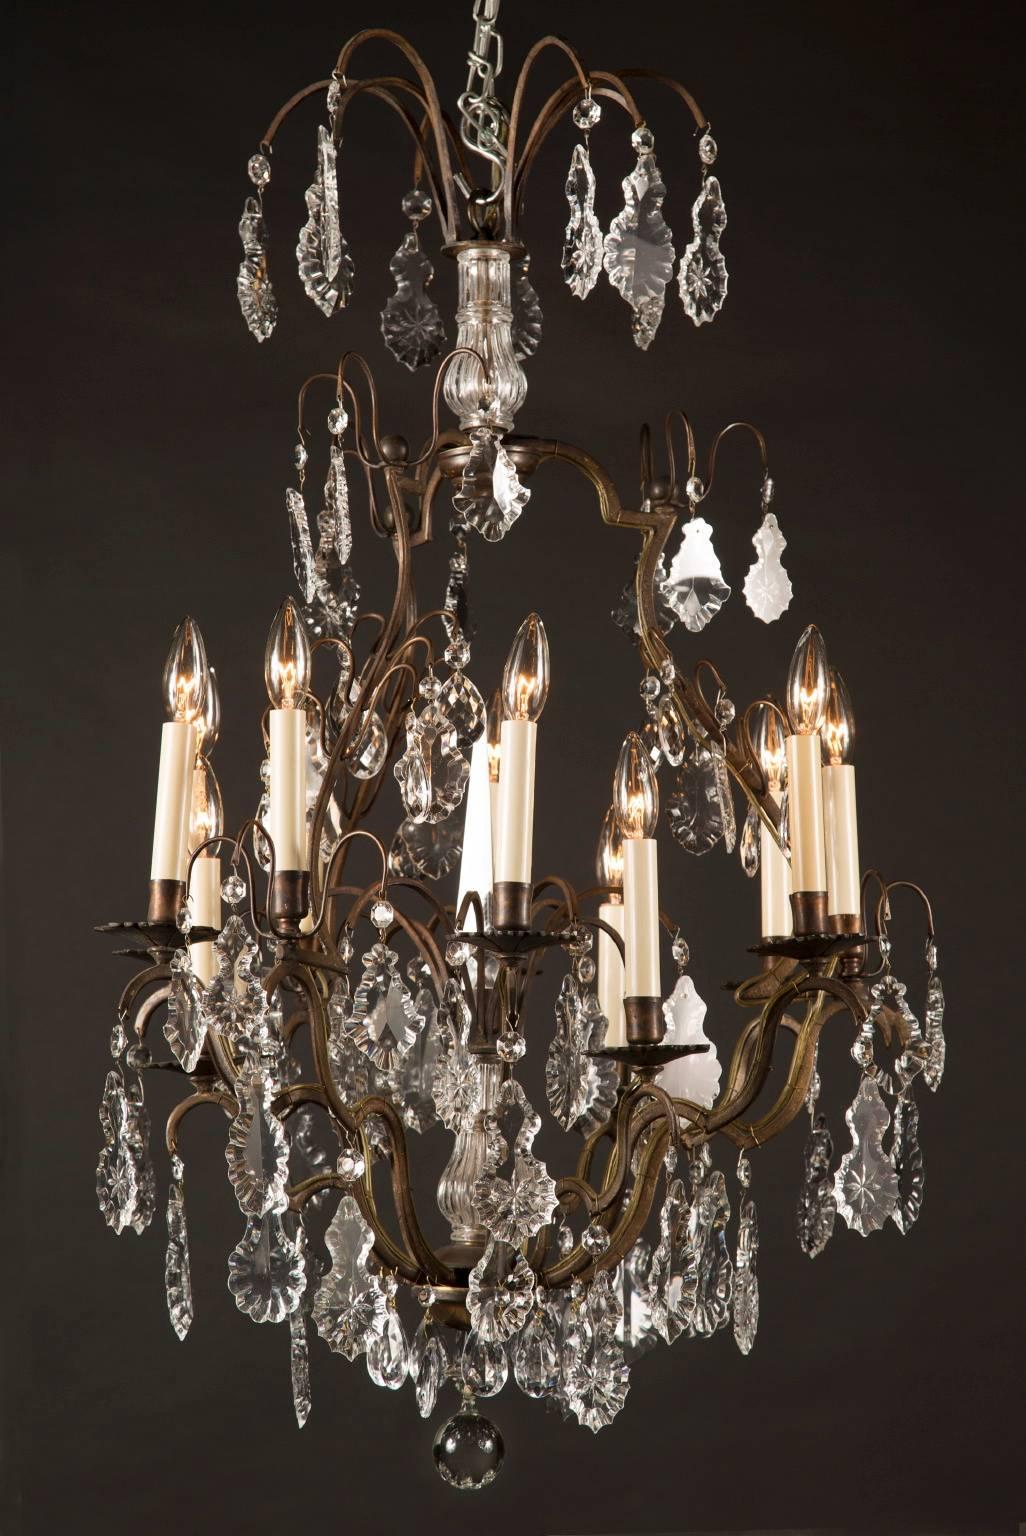 This chandelier is made with a dark bronze frame, which has then been draped with beautiful crystal plaquettes. A crystal ball hangs from the finial. The chandelier is topped with a crown of curved bronze arms supporting crystal plaquettes, all of